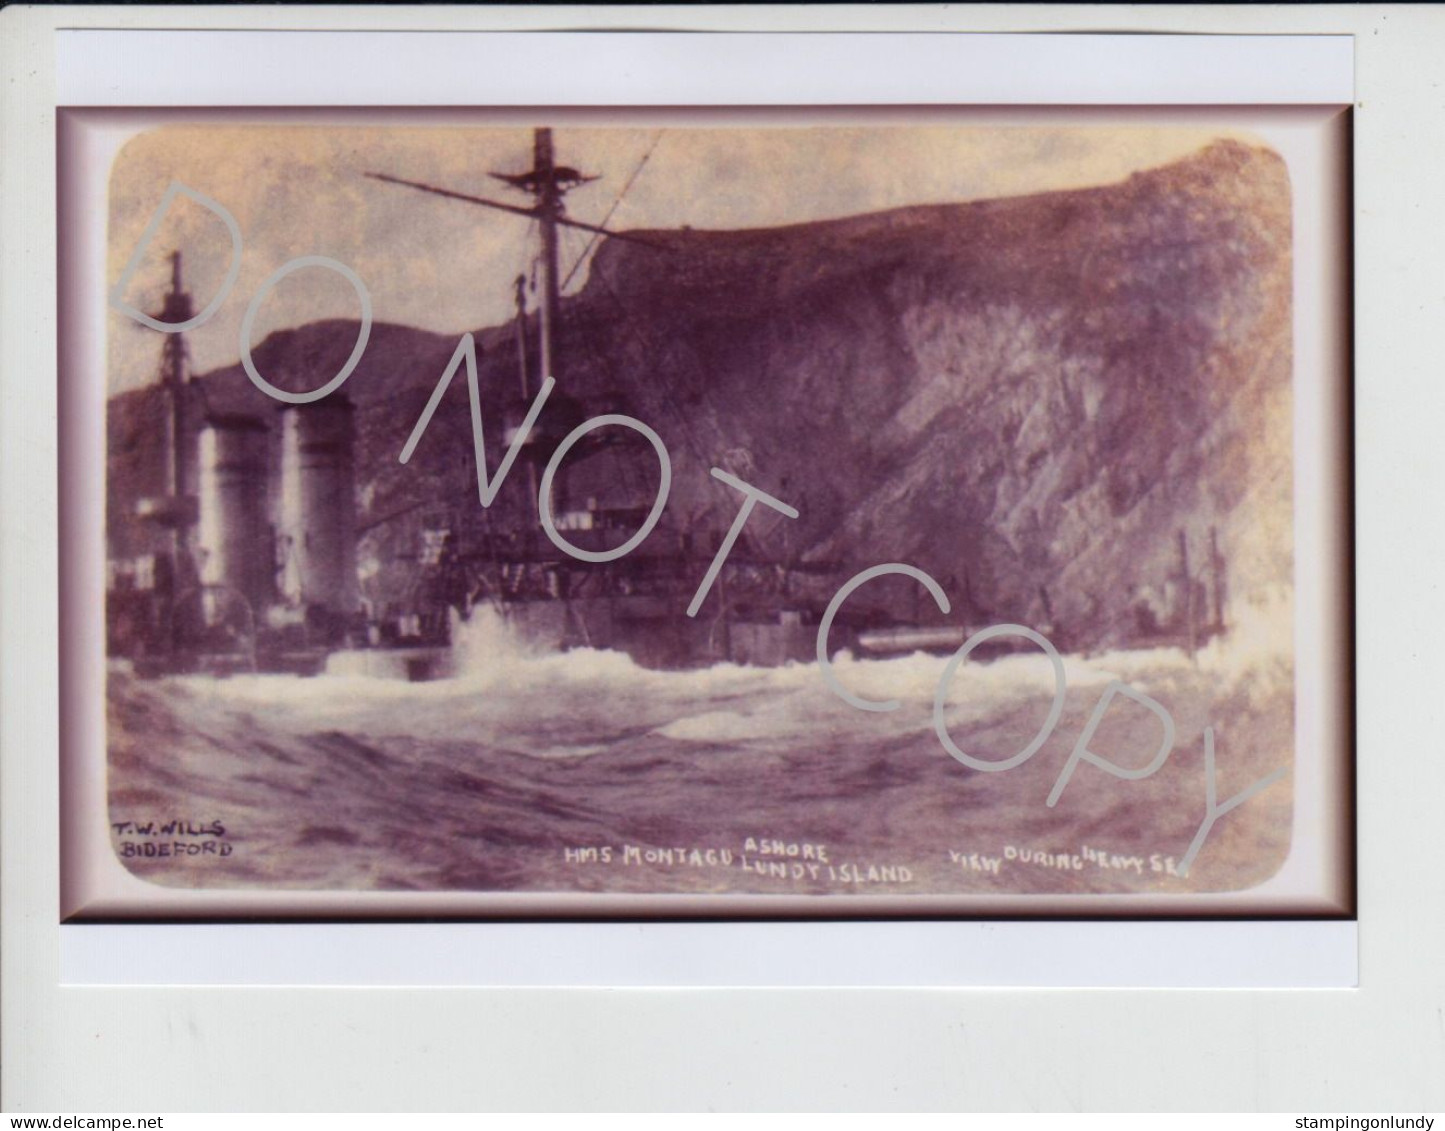 61. WI06. Four Lundy Island HMS Montague/Montagu Warship Produced By Wills Retirment Sale Price Slashed! - Guerra, Militares